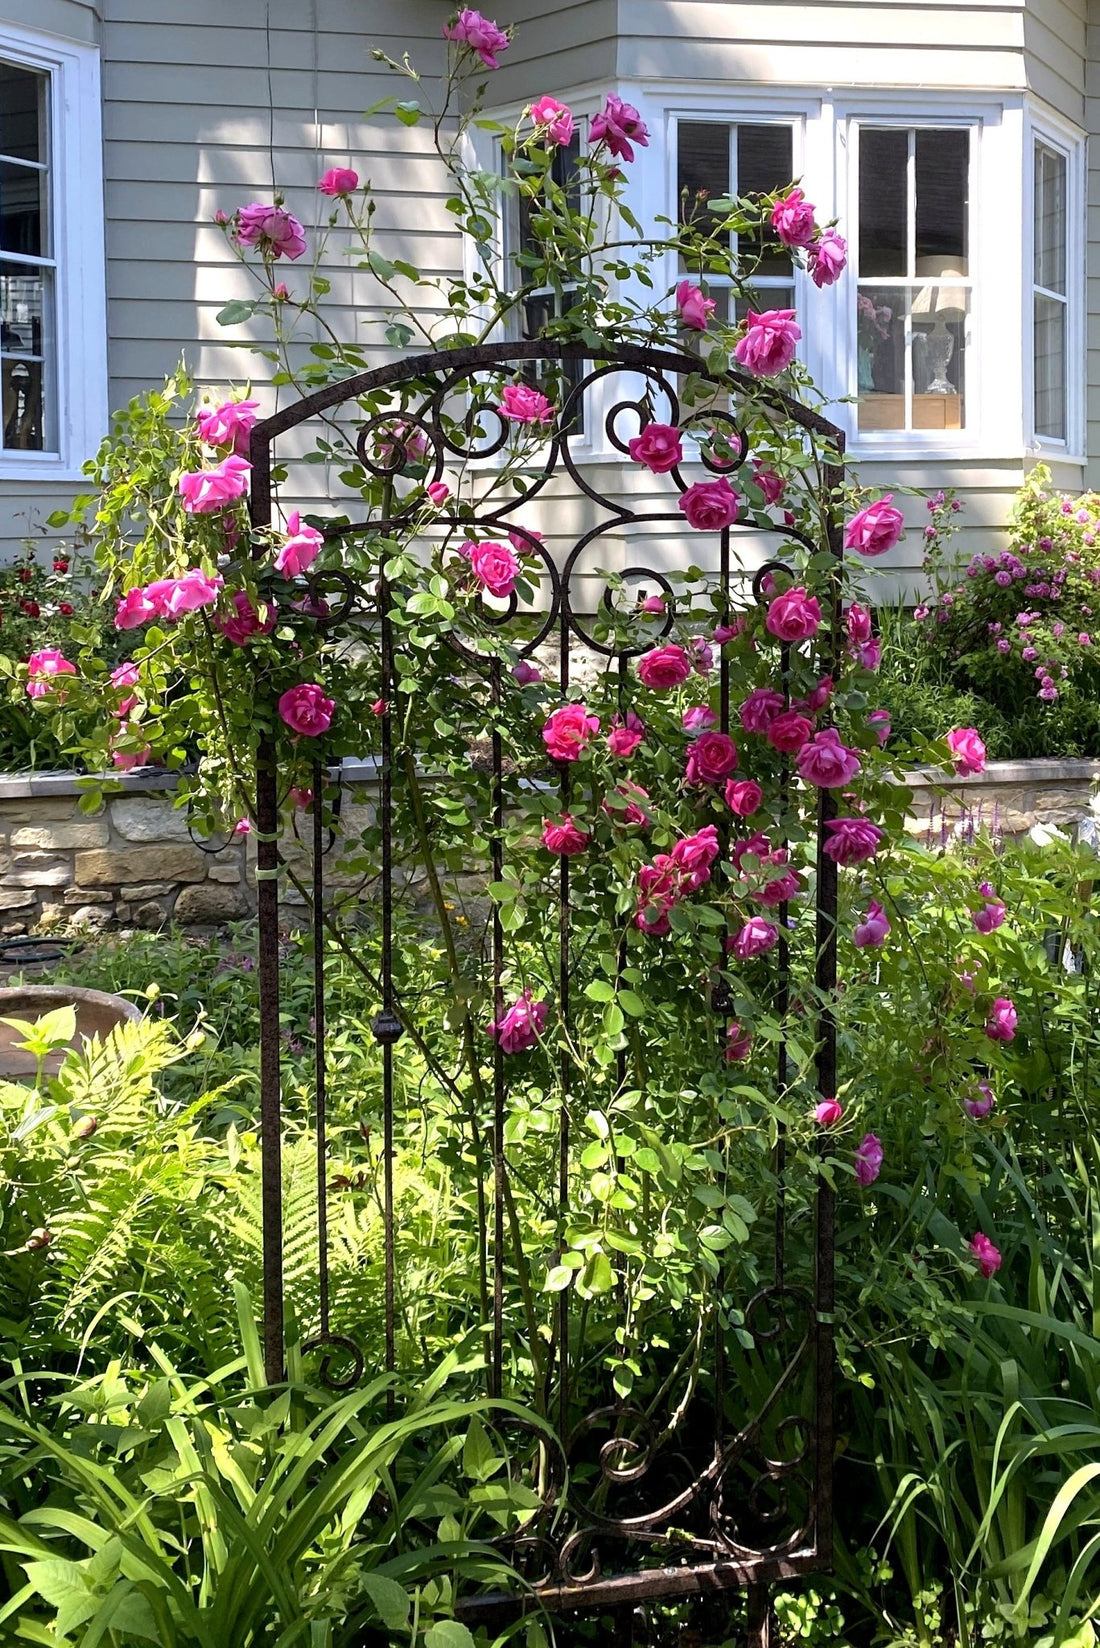 H Potter brand metal garden trellis with pink roses outside near a home